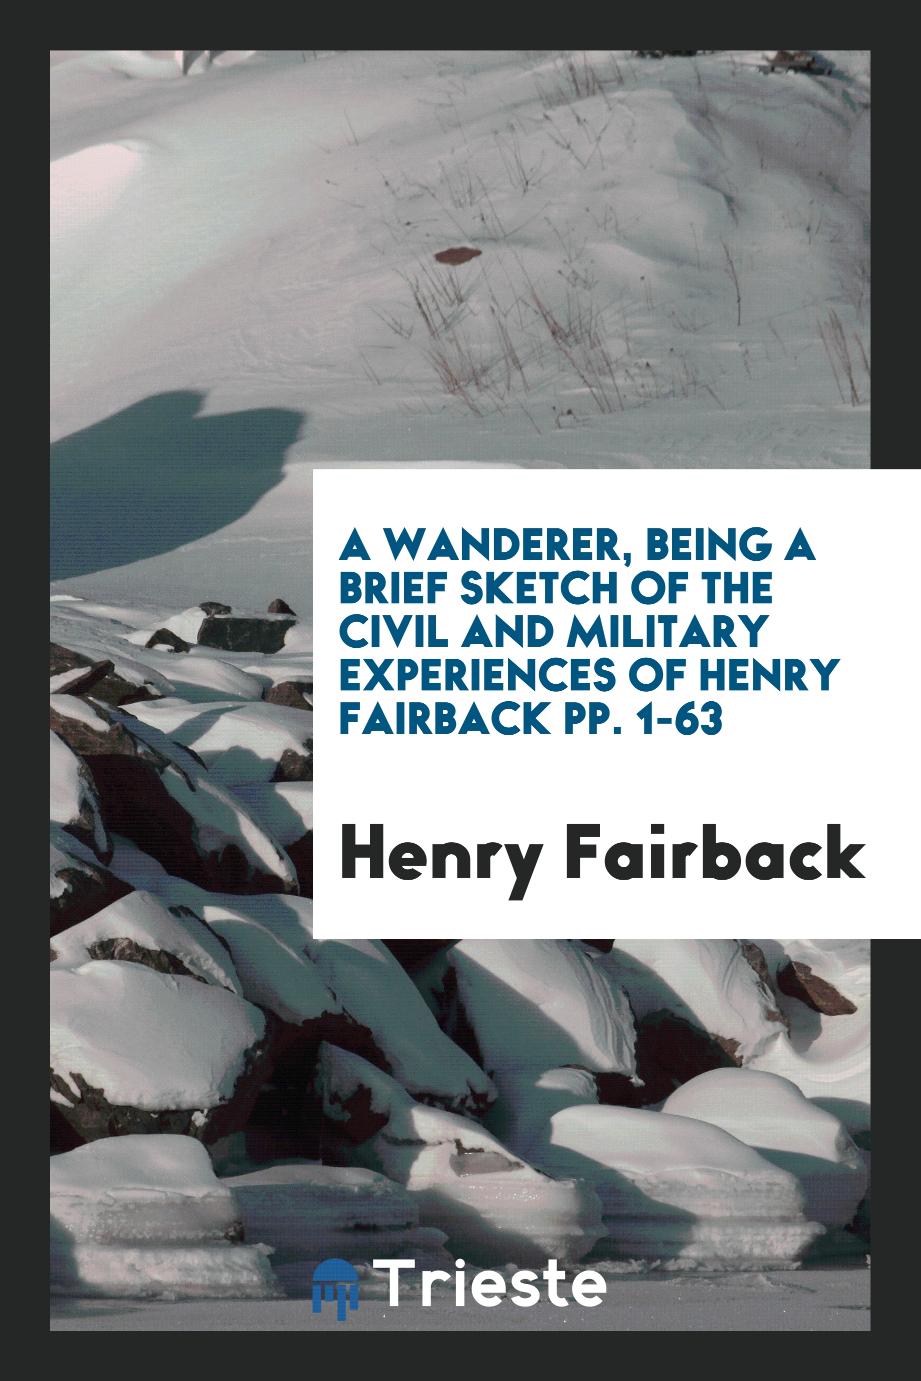 A Wanderer, Being a Brief Sketch of the Civil and Military Experiences of Henry Fairback pp. 1-63